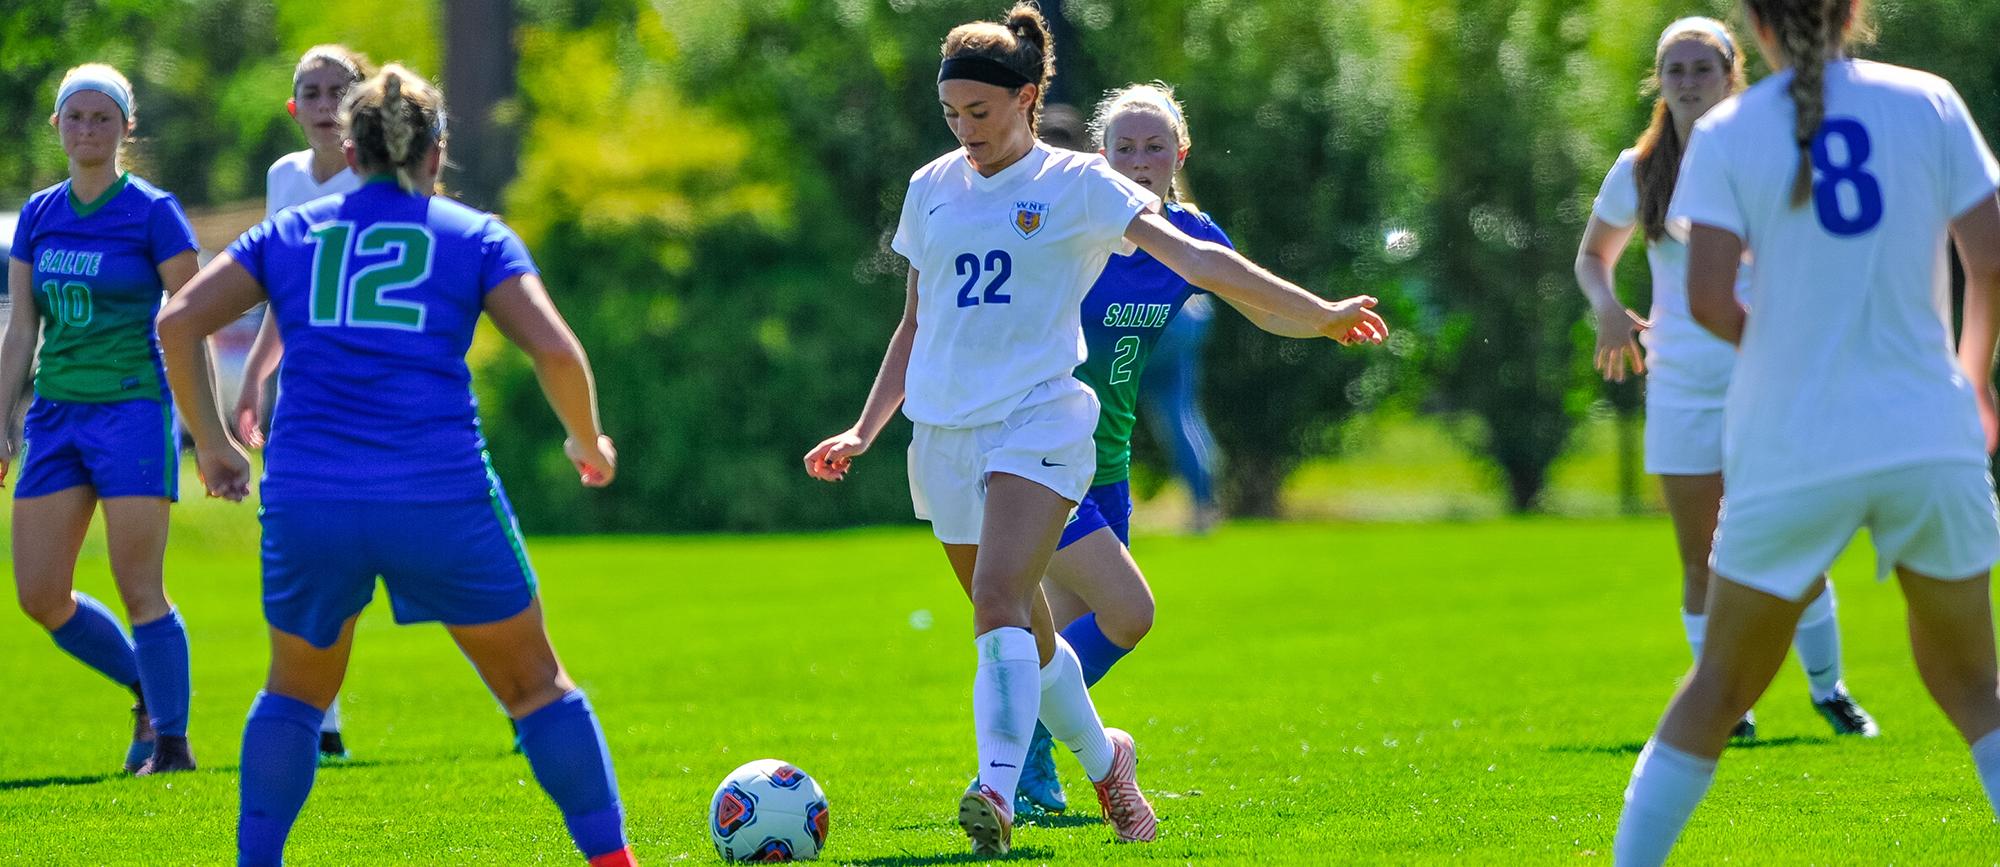 Senior Maddie Morgan scored her first goal of the season in Western New England's 2-1 victory at Eastern Nazarene on Saturday. (Photo by Bill Sharon/Spartan SportShots)